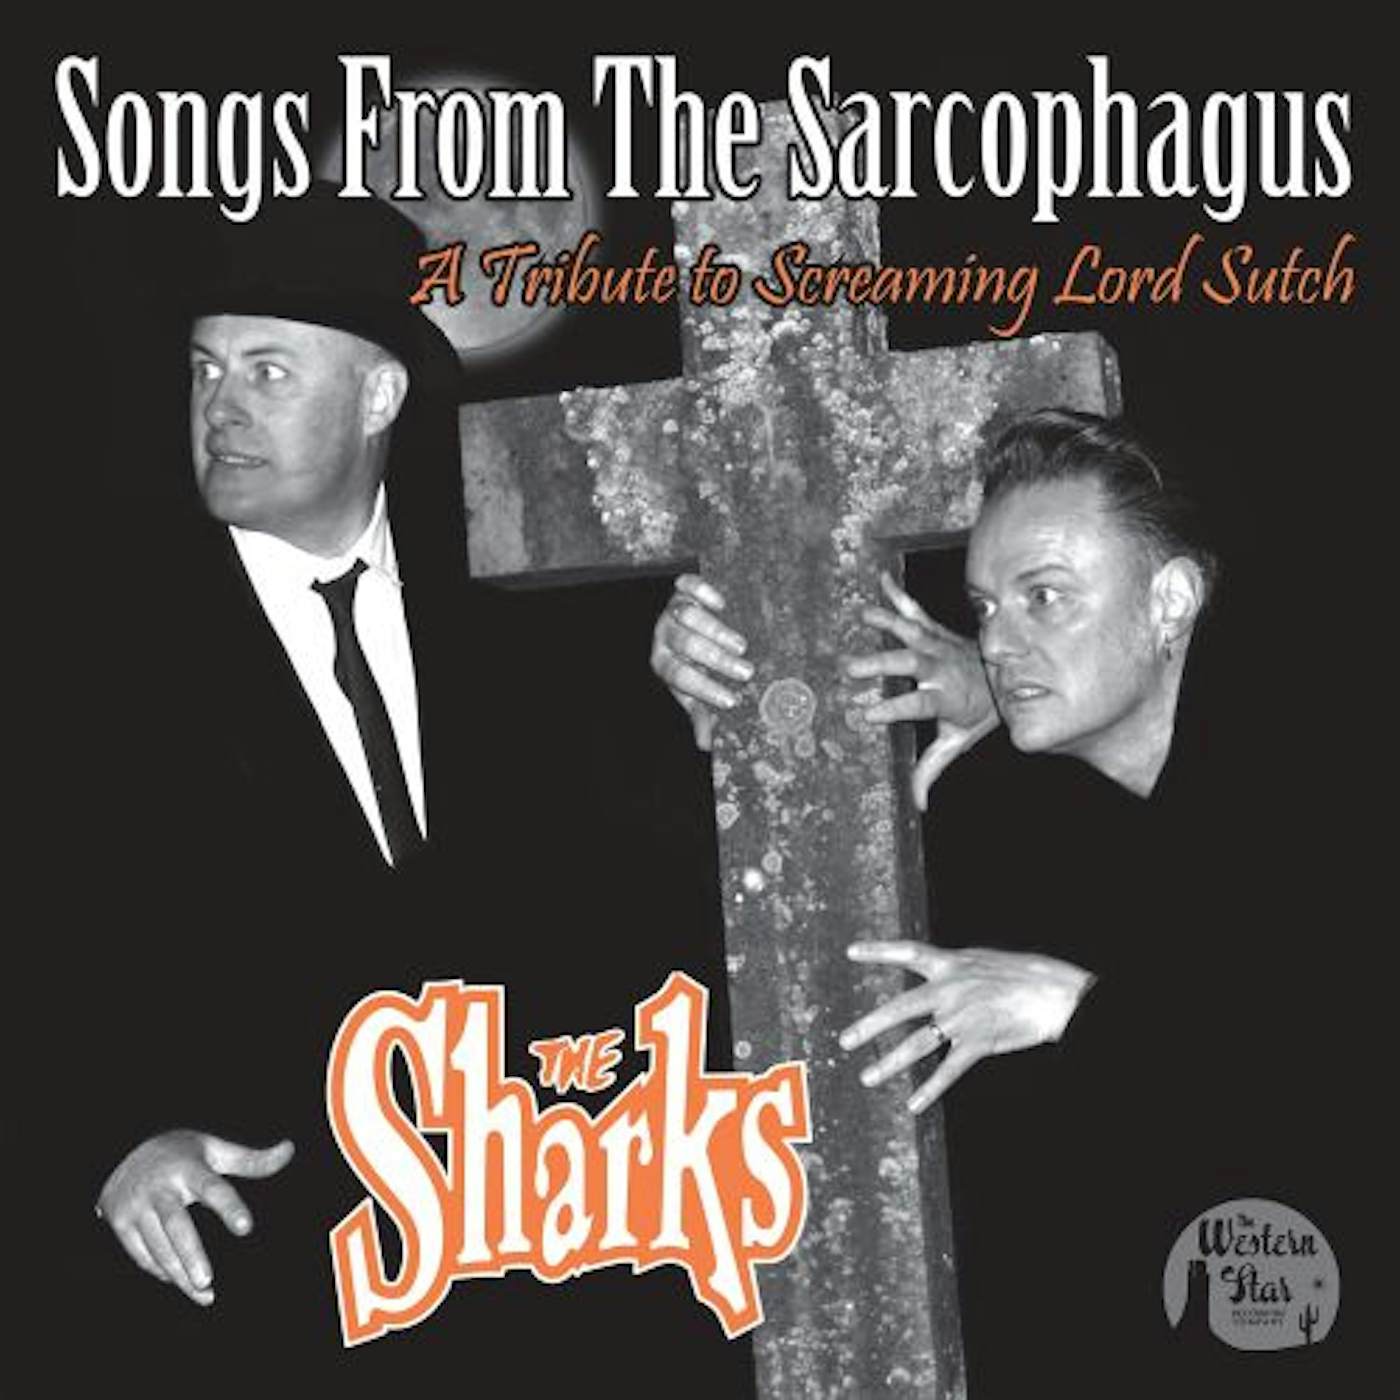 Sharks SONGS FROM THE SARCOPHAGUS Vinyl Record